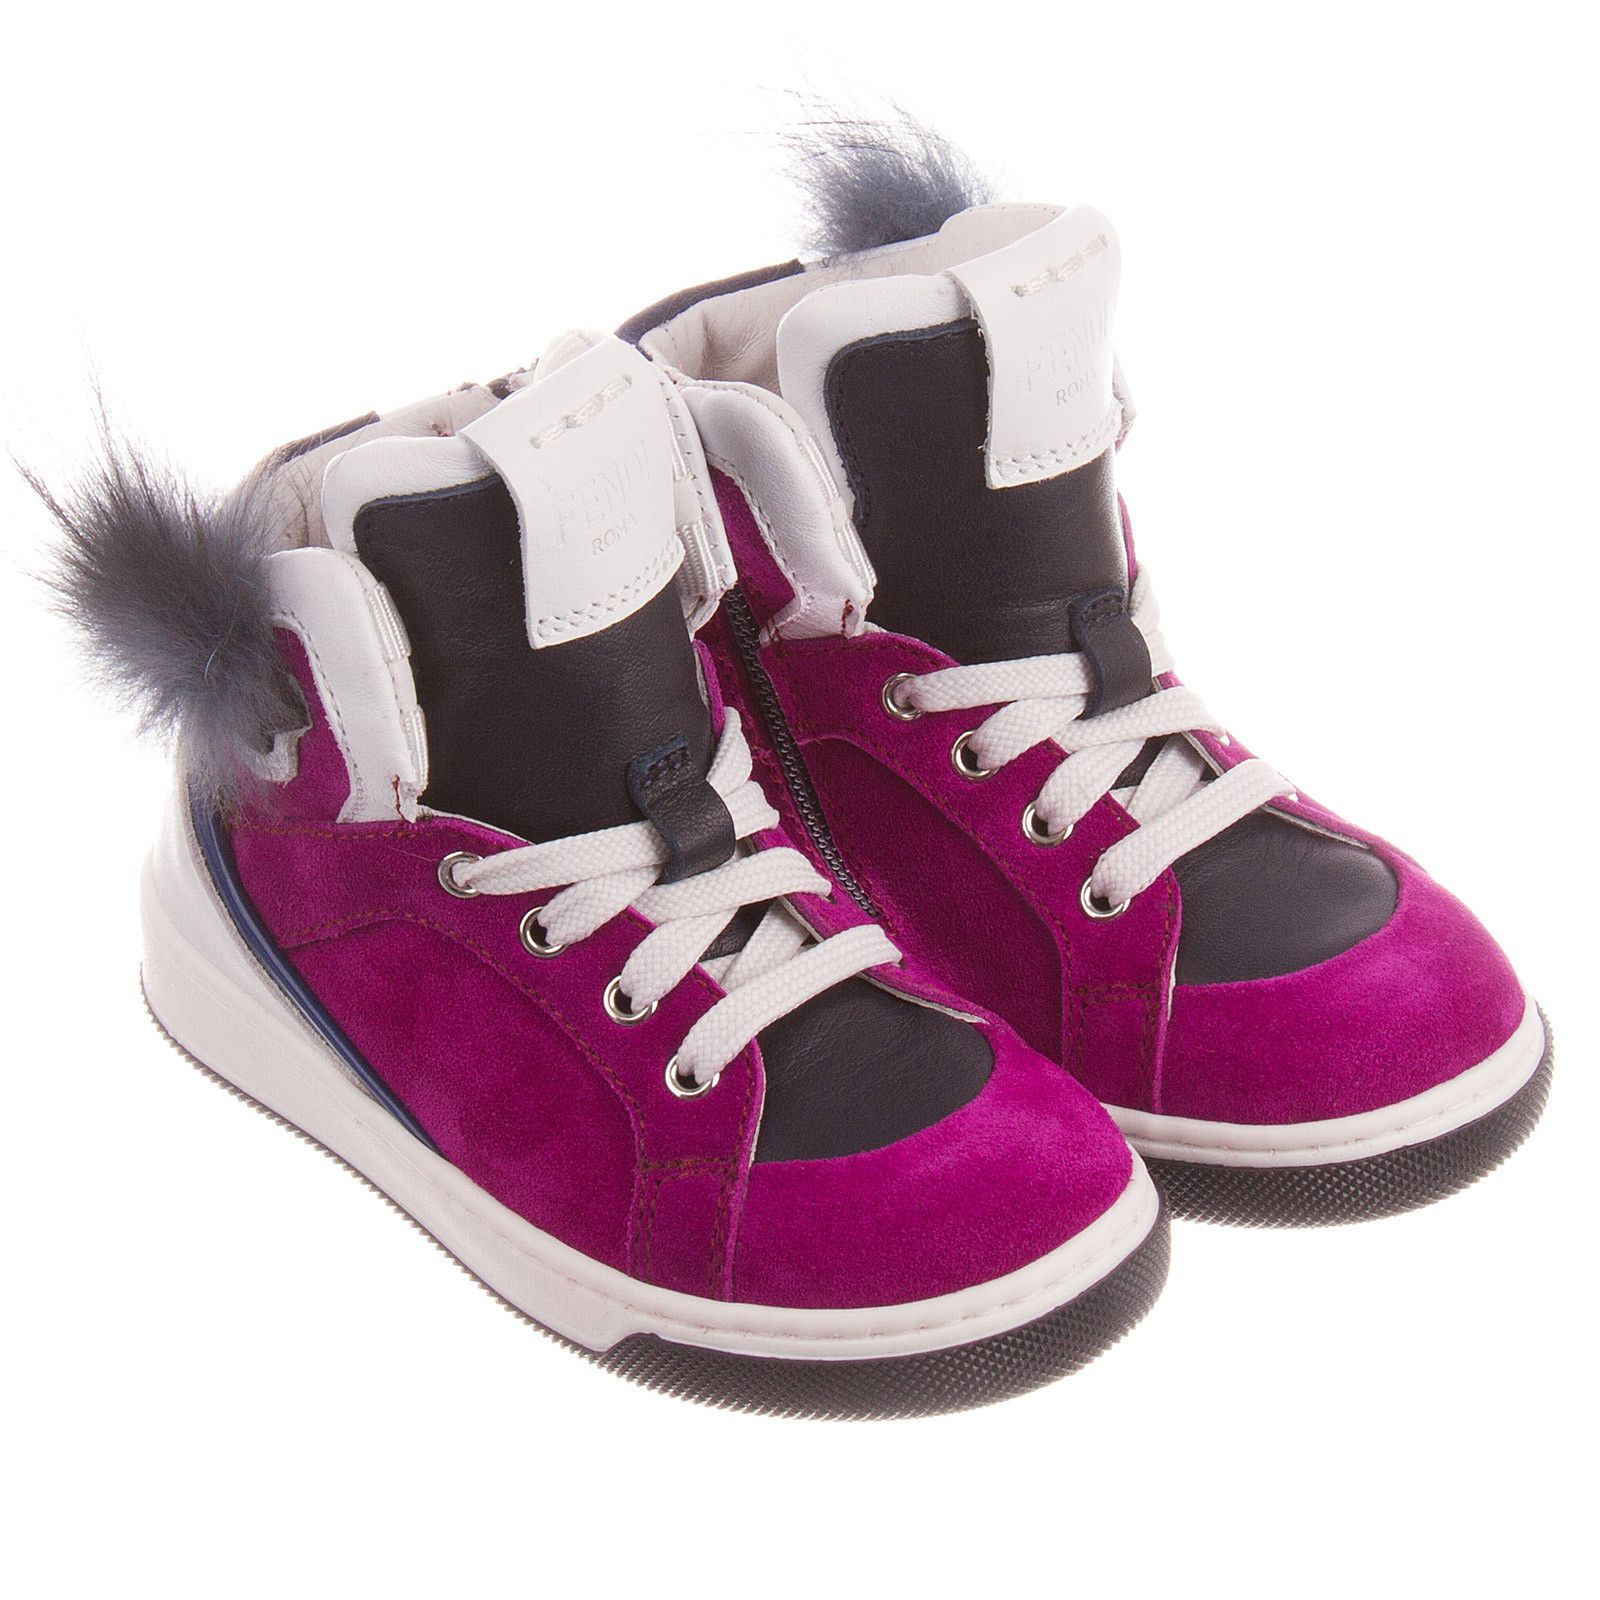 Boys&Girls Purple Suede High-top Trainers With Fur - CÉMAROSE | Children's Fashion Store - 1